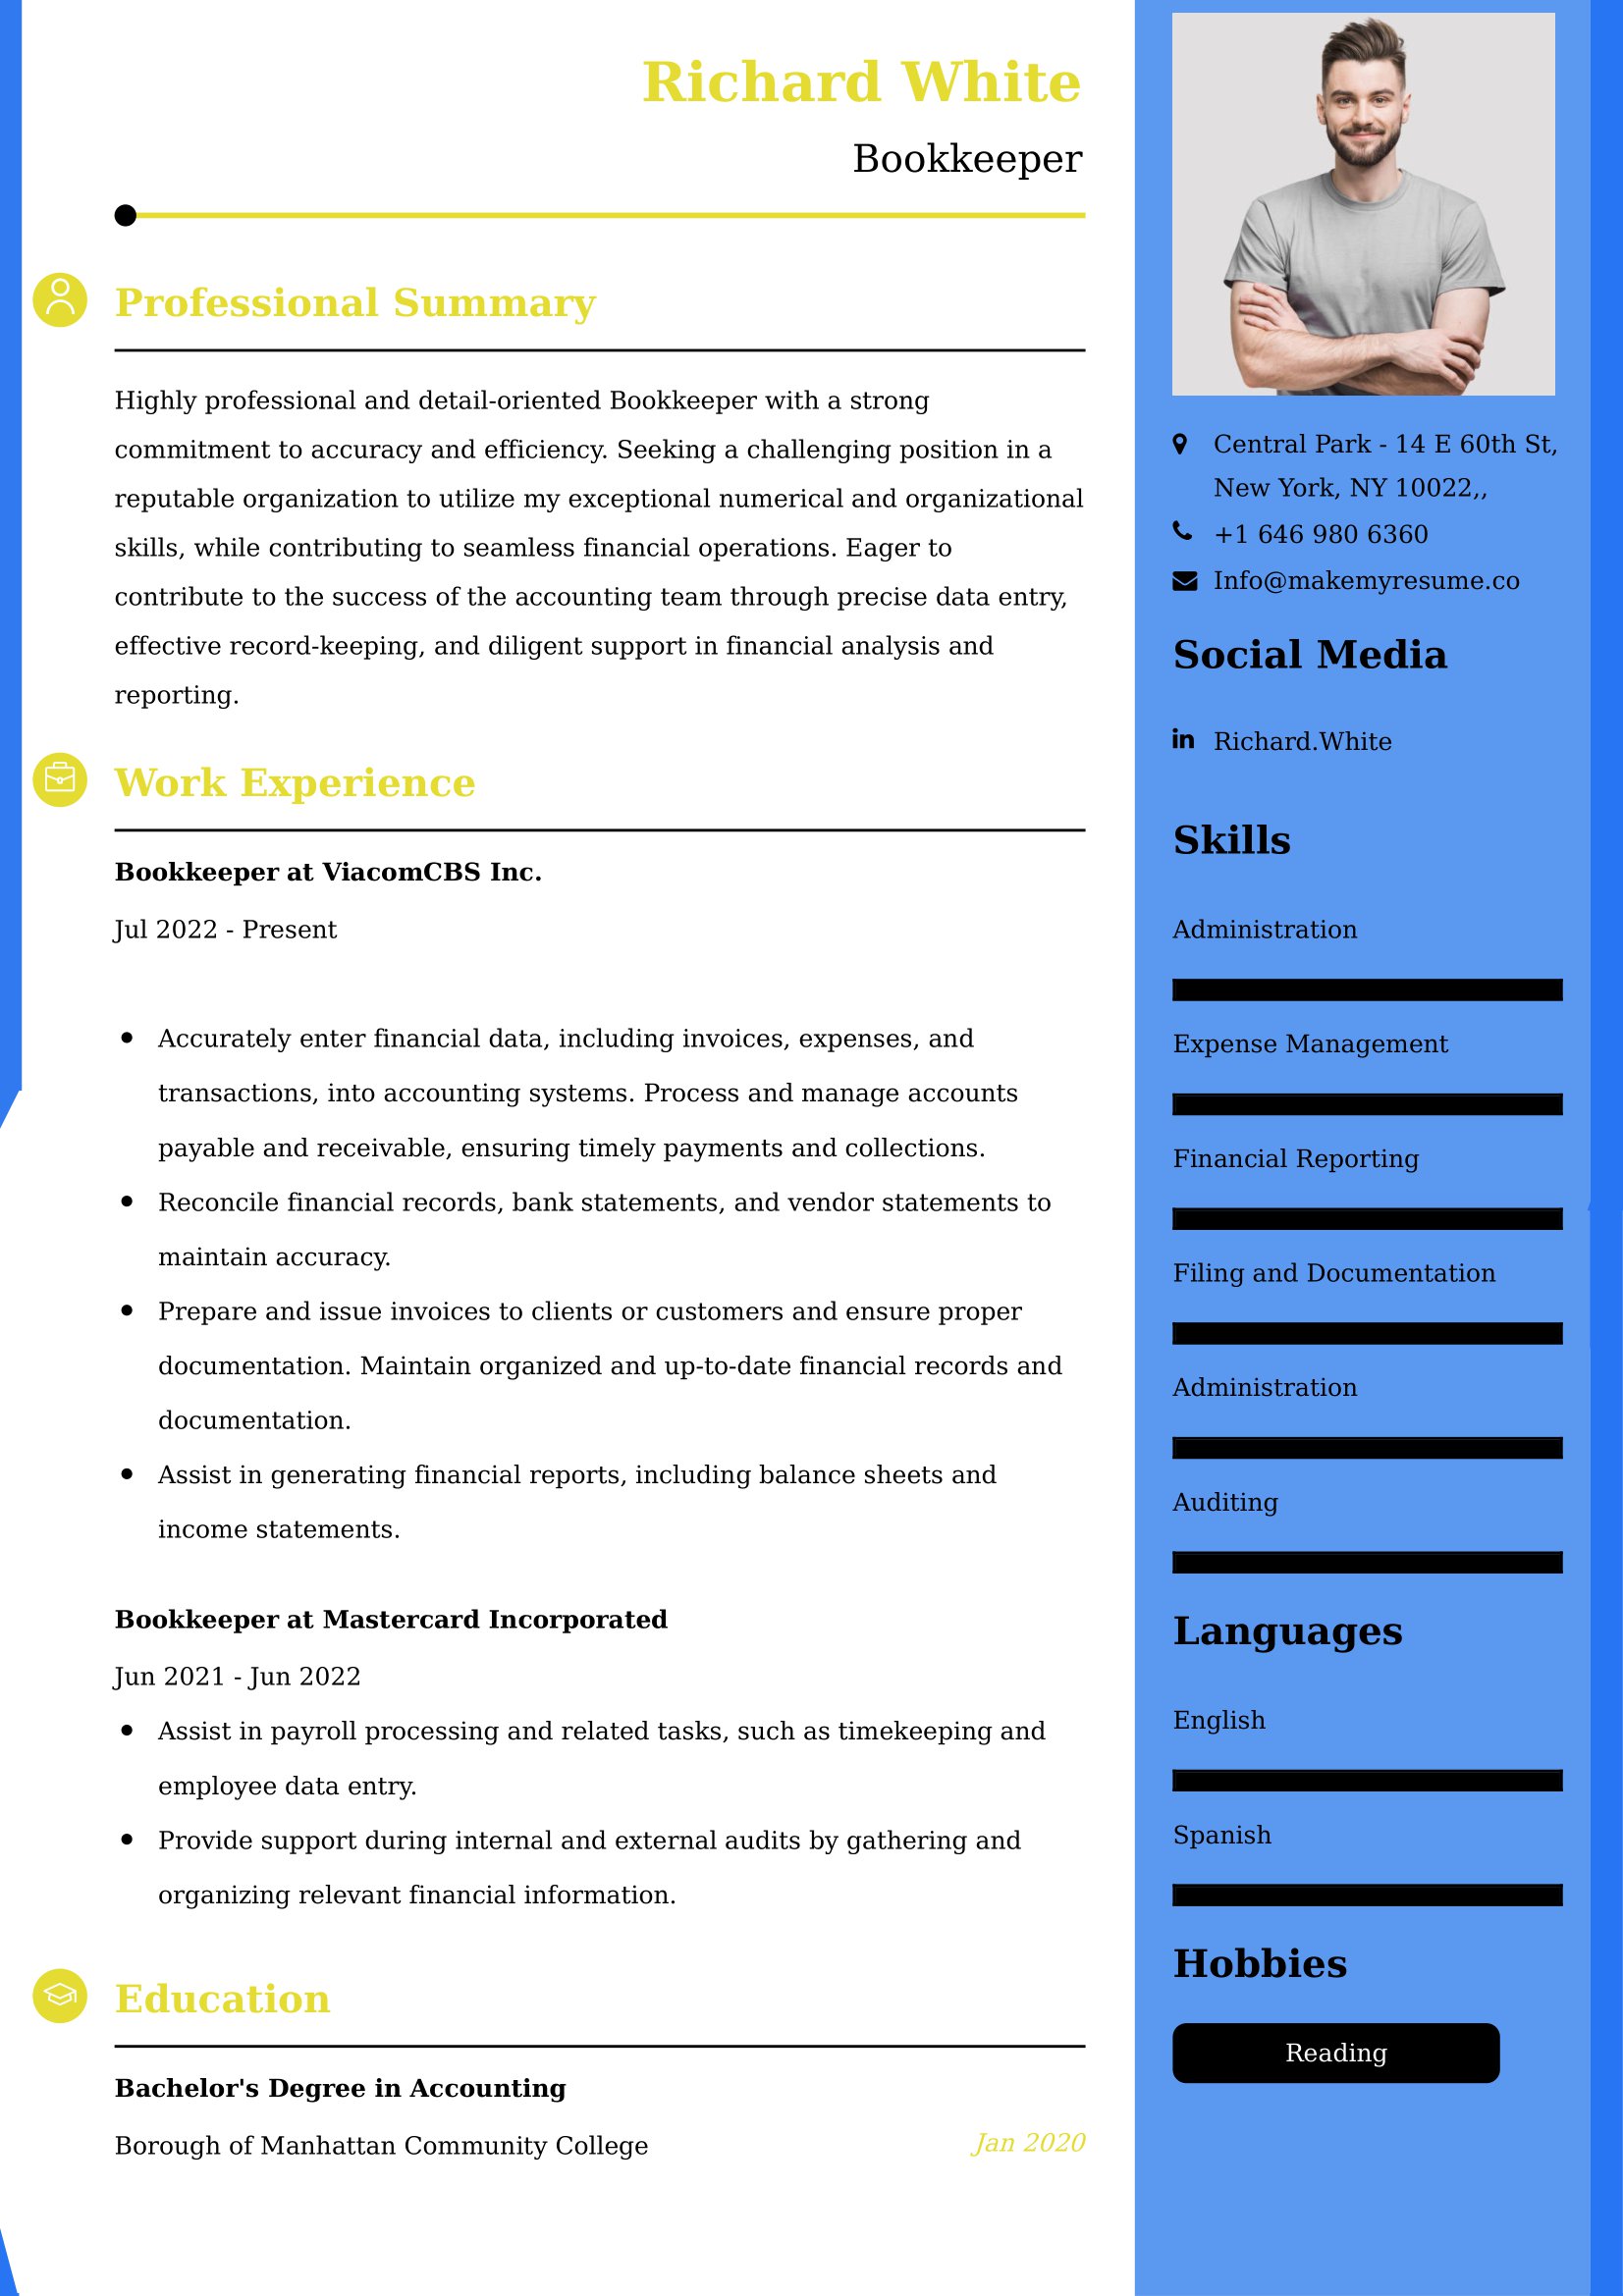 Bookkeeper Resume Examples for UK Jobs - Tips and Guide